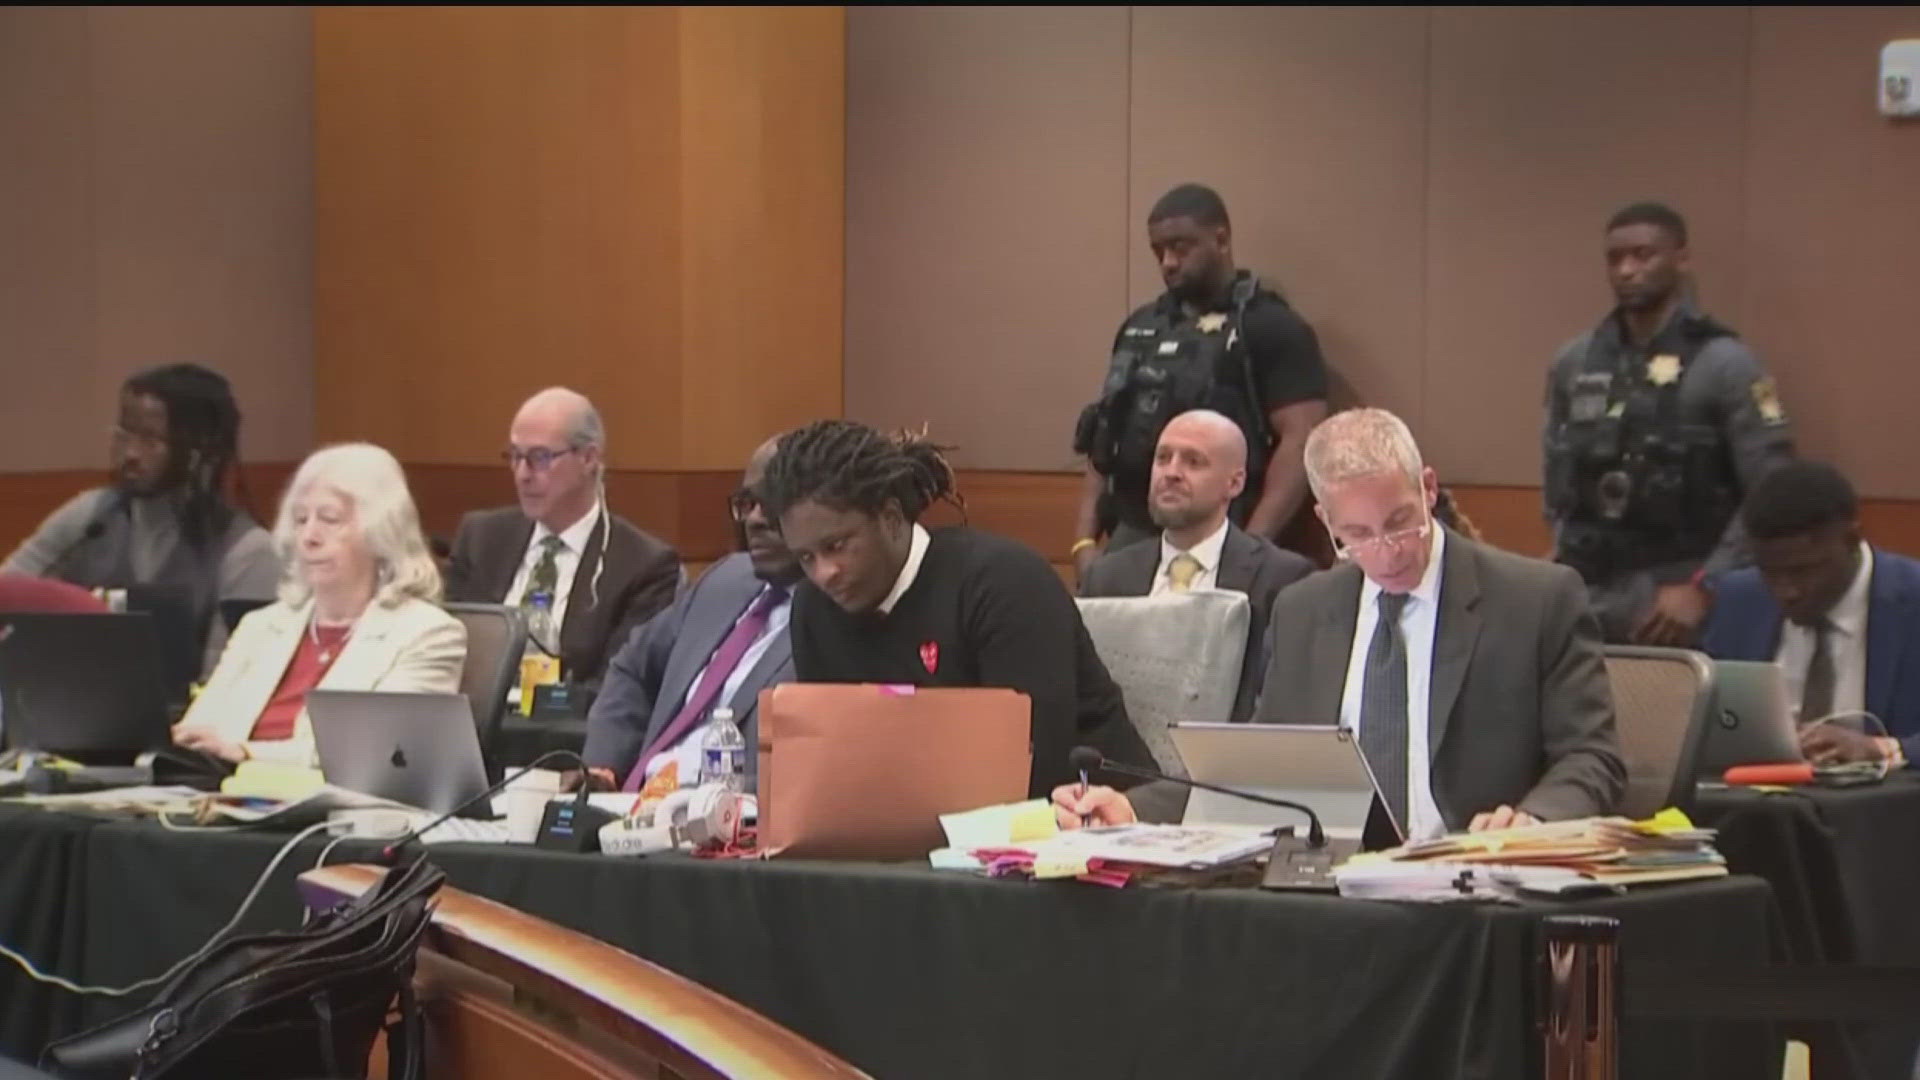 Young Thug is currently on trial for violating Georgia's RICO law.